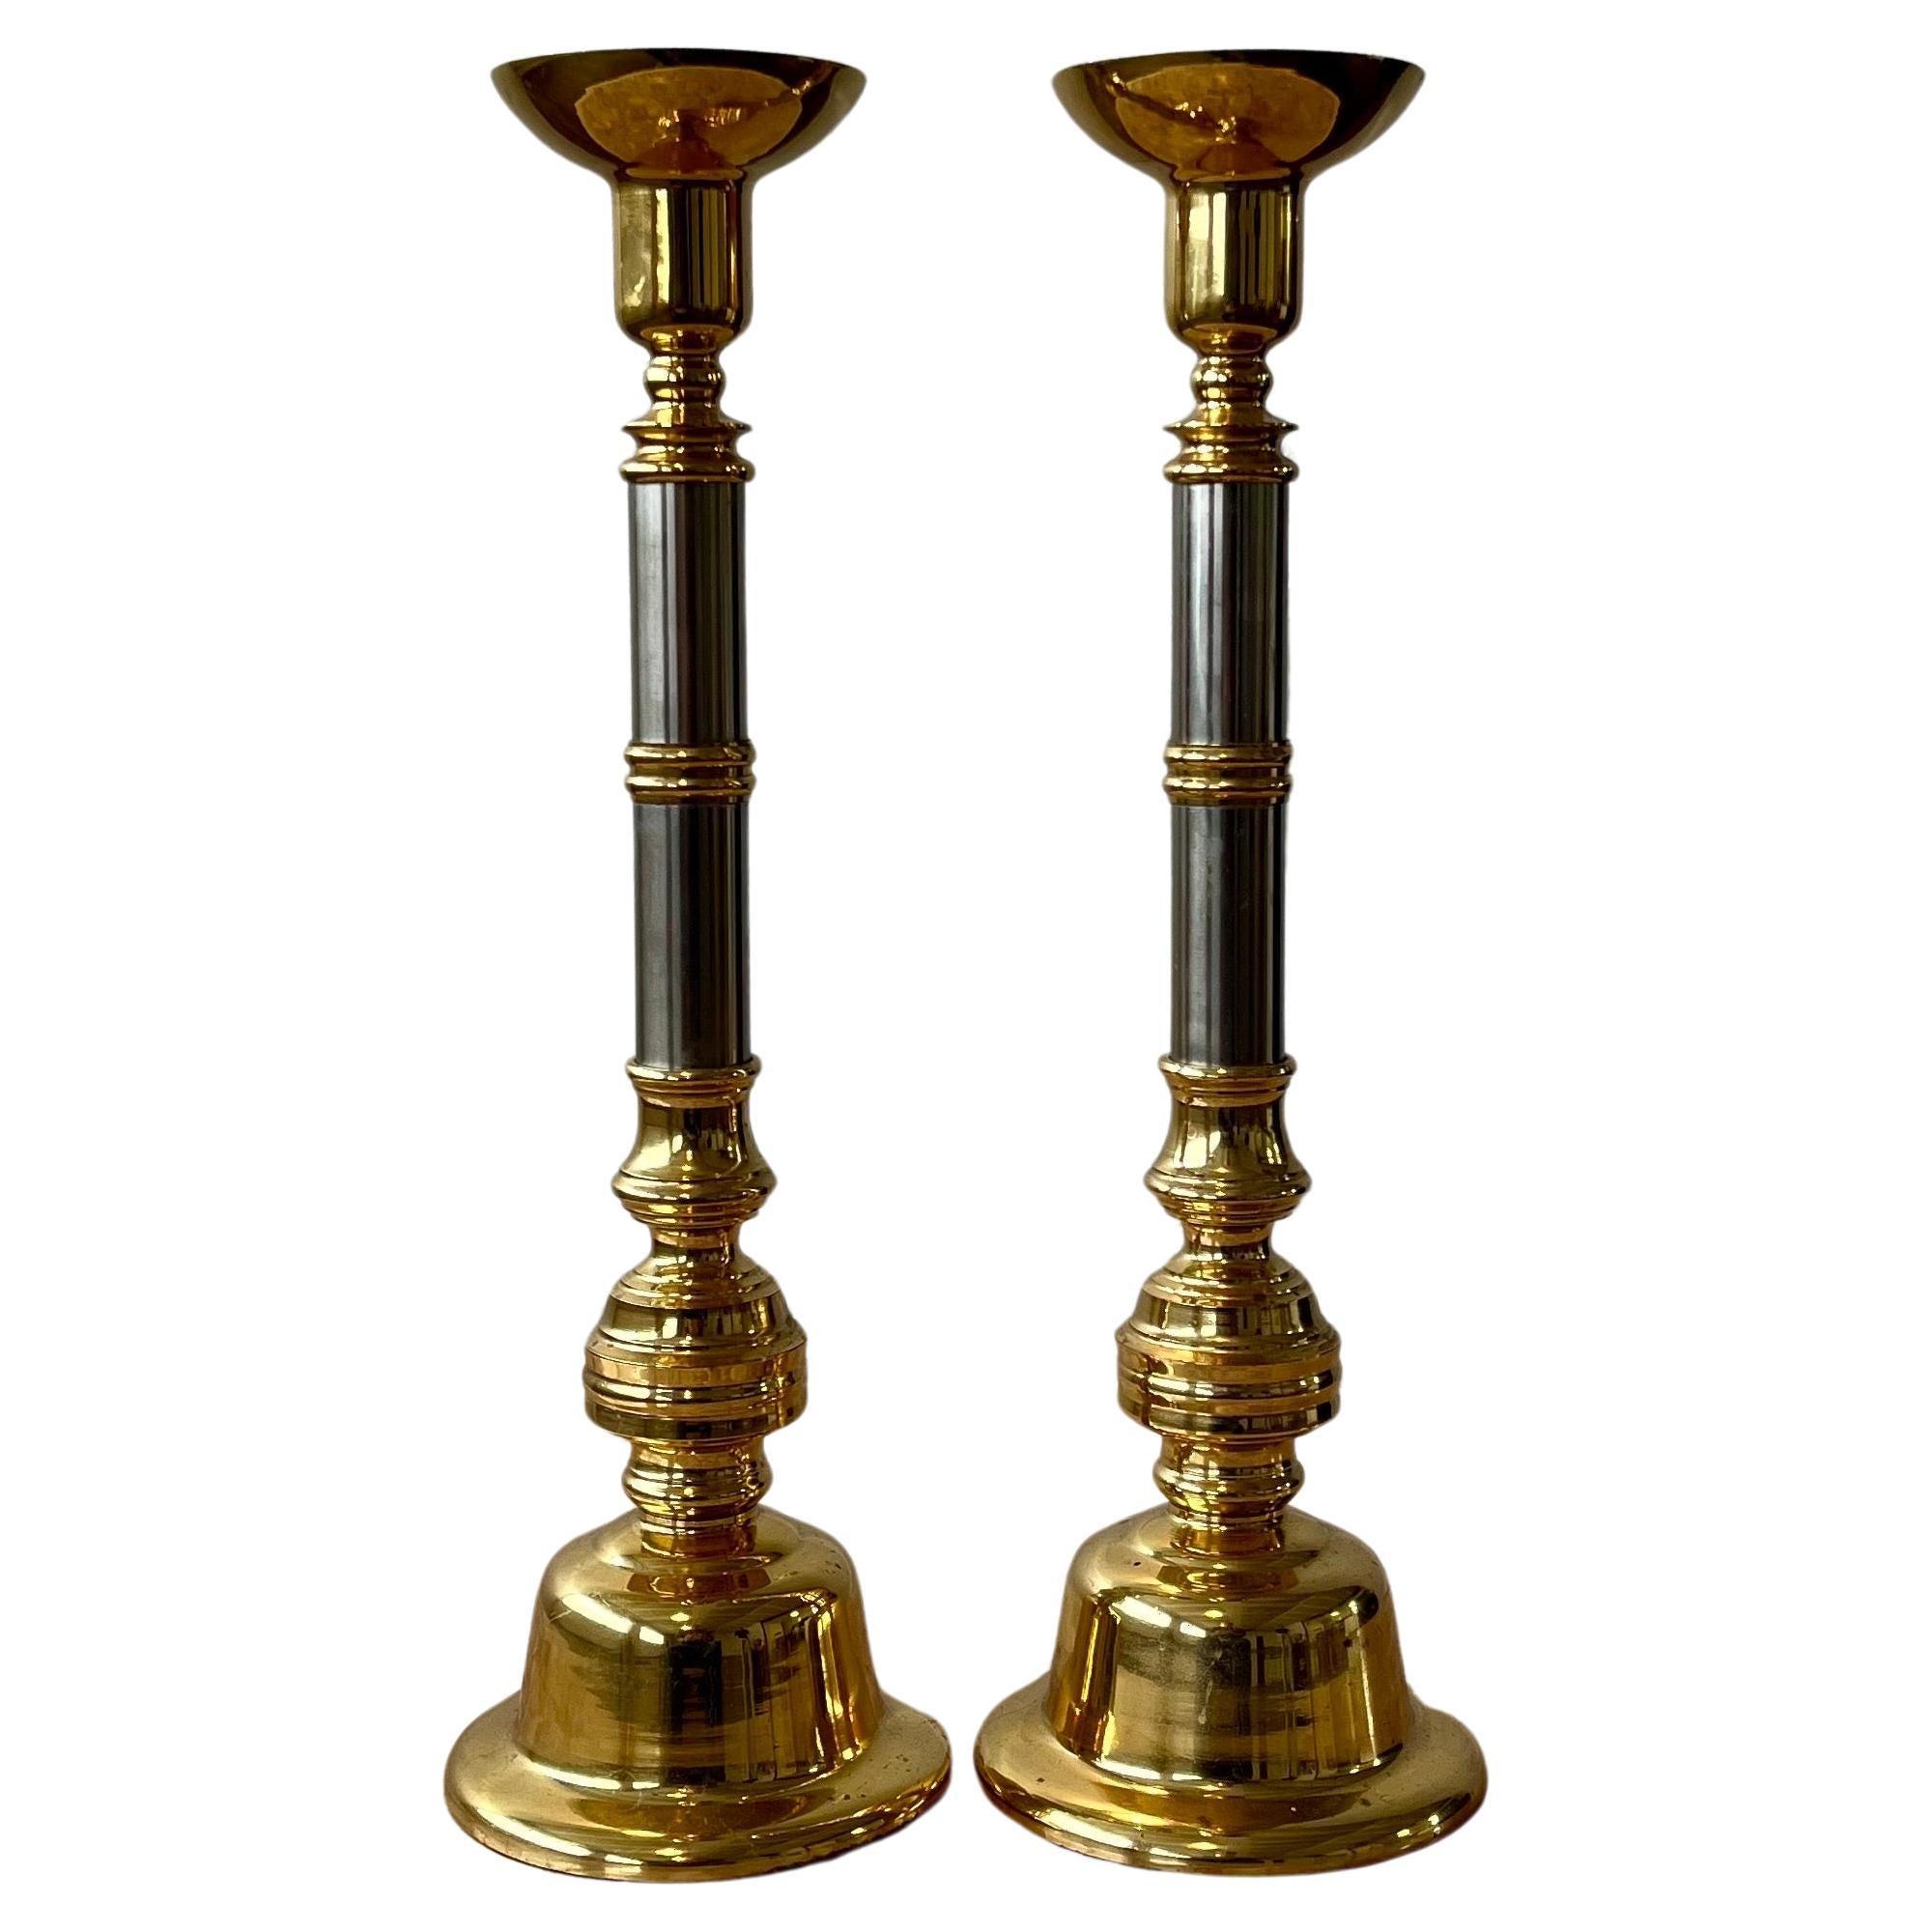 1970's Candle Holders Neoclassical Brass and Chrome Candle Sticks - a Pair